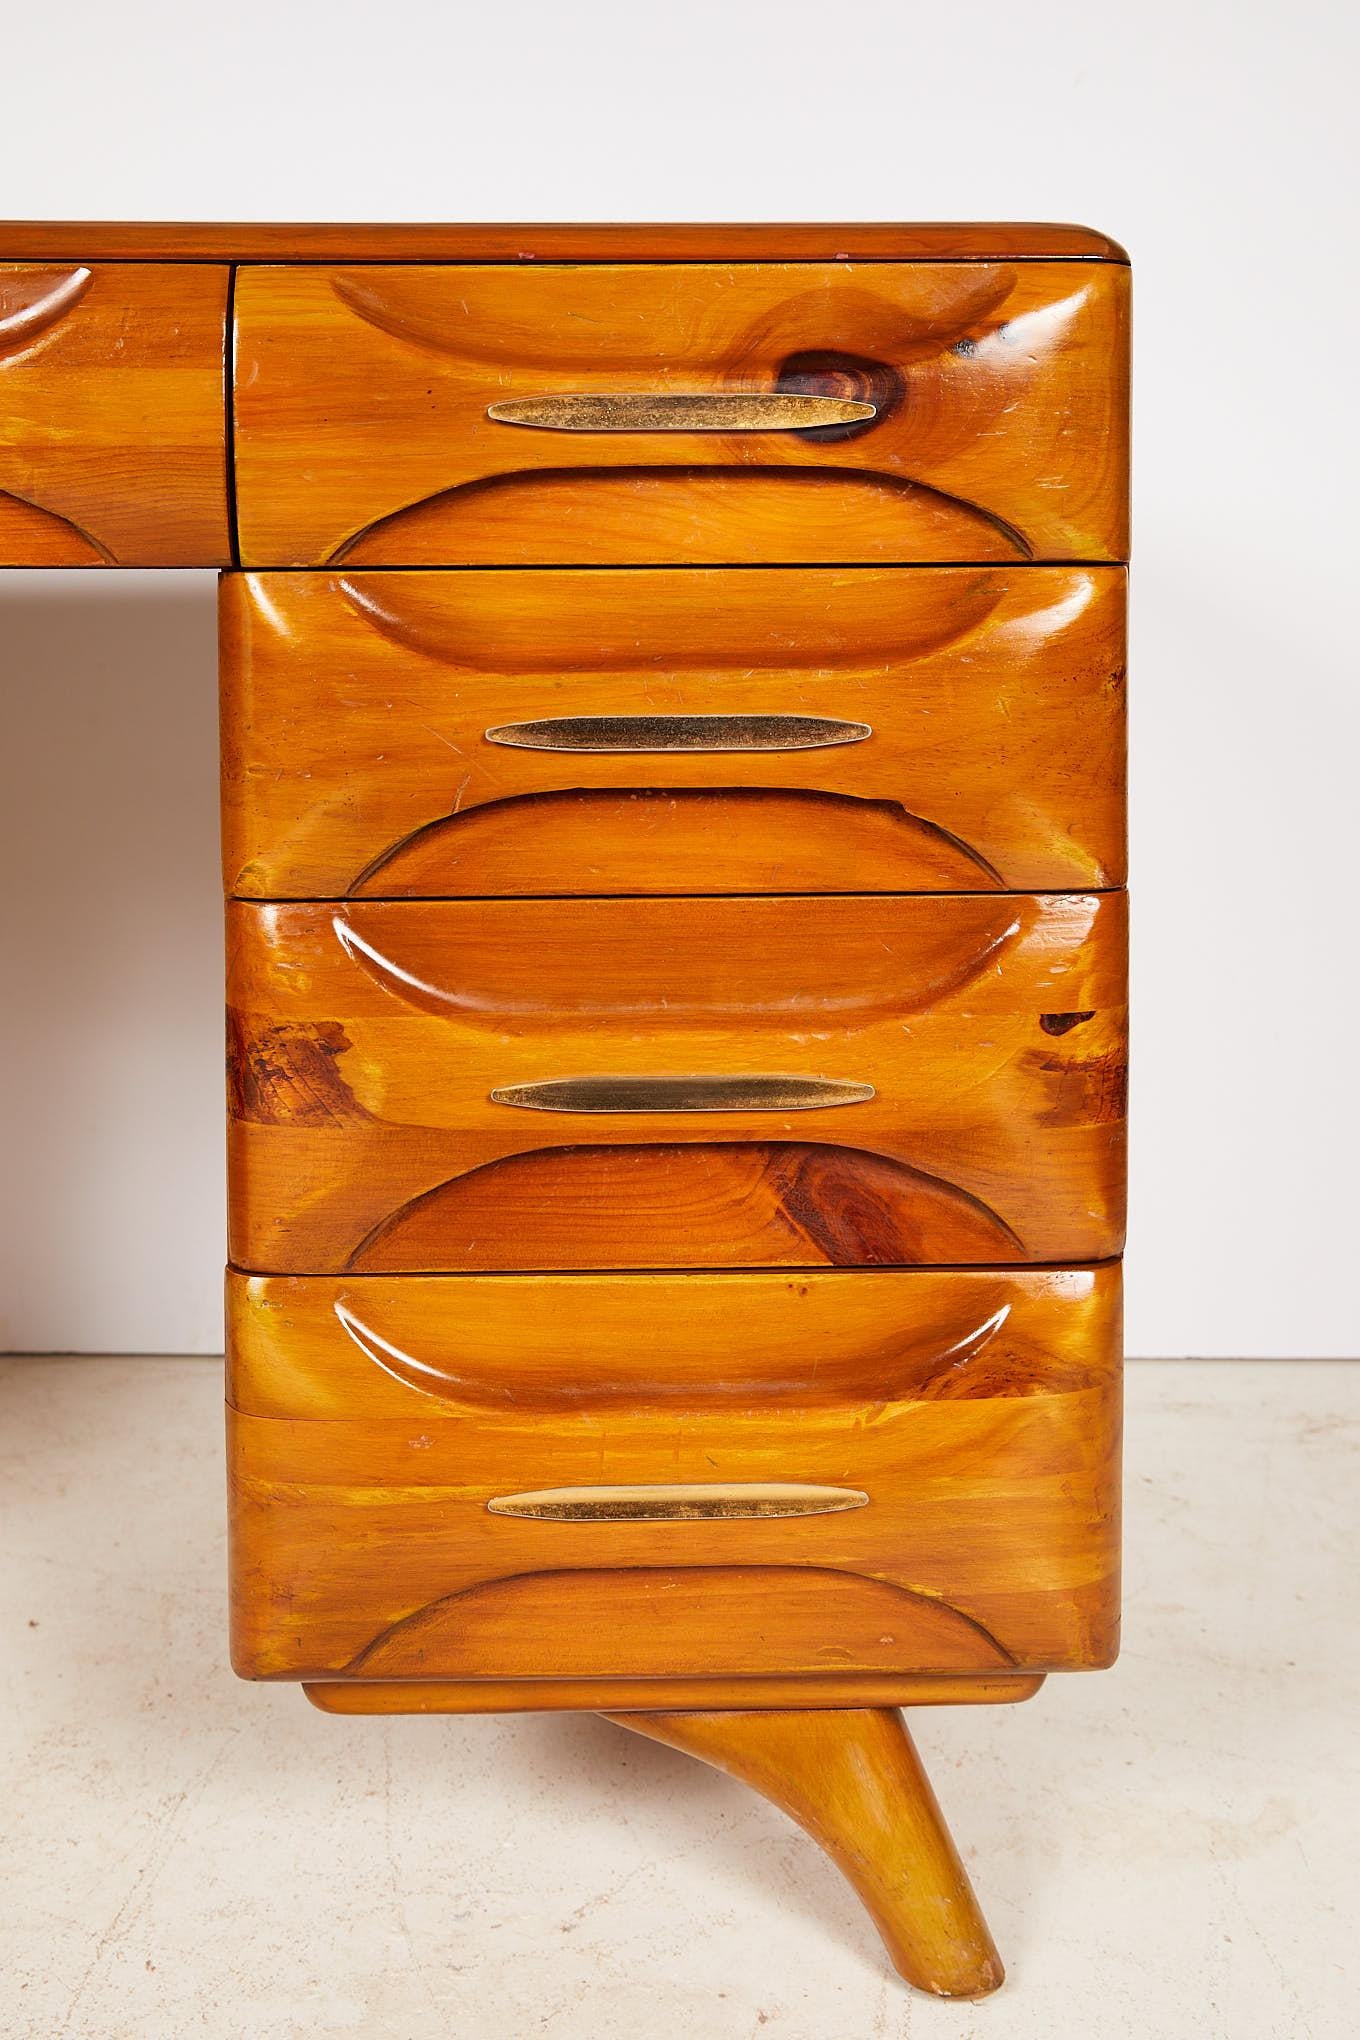 20th Century Midcentury Sculptured Pine Desk by the Franklin Shockey Company